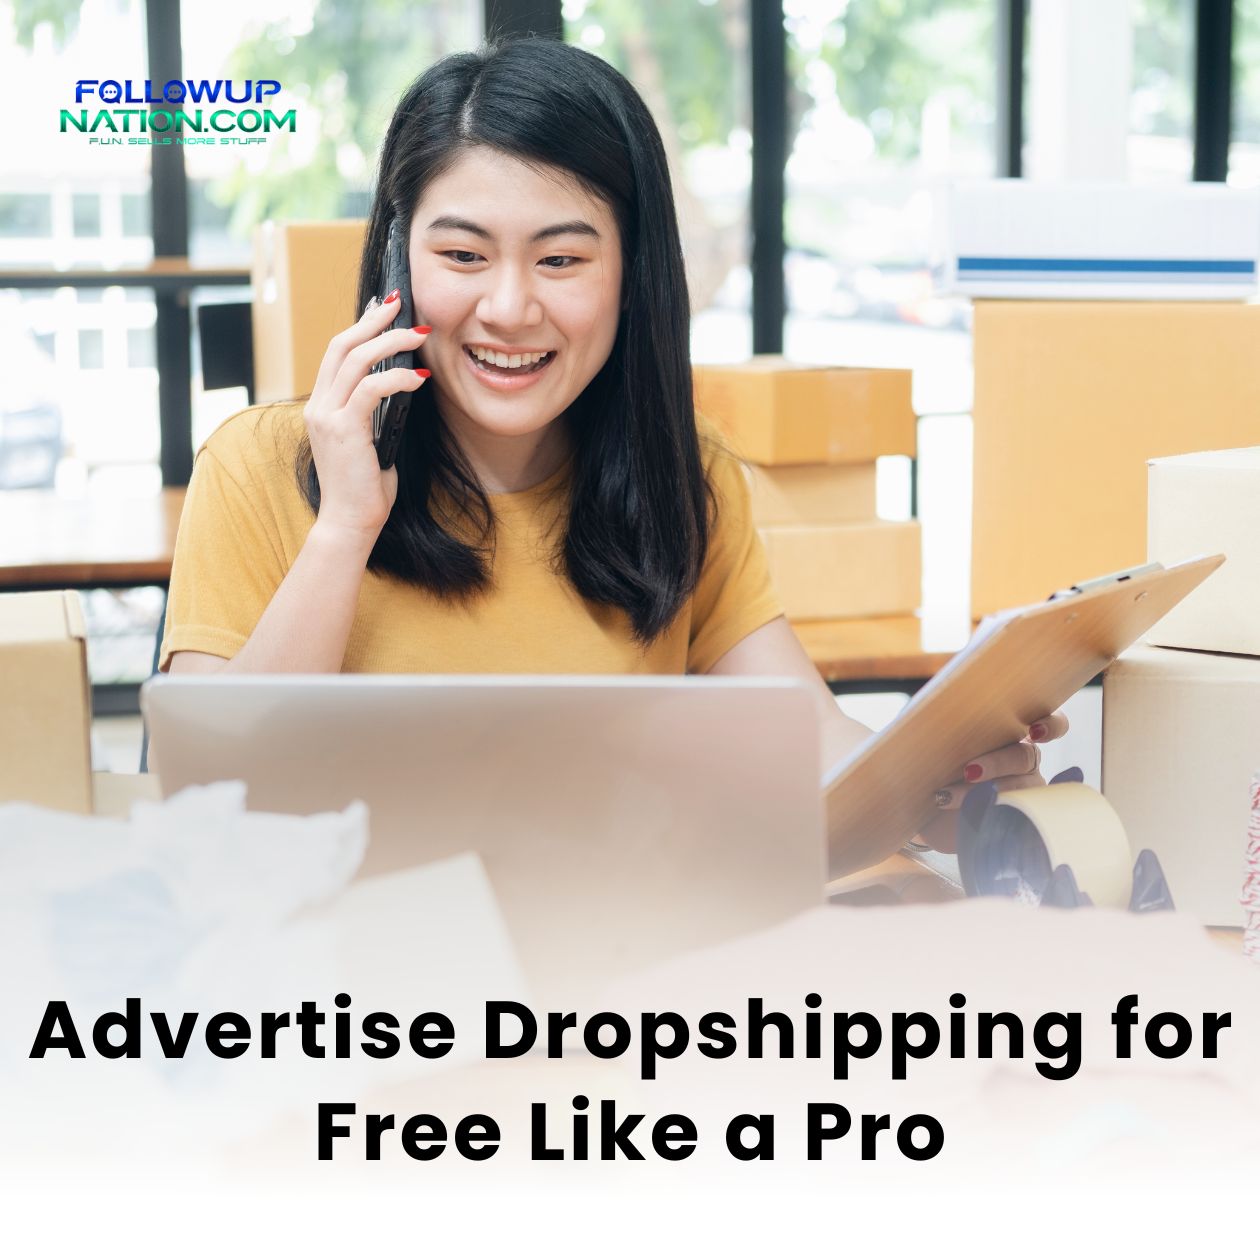 How to Dropship Without Ads? Advertise Dropshipping for Free Like a Pro